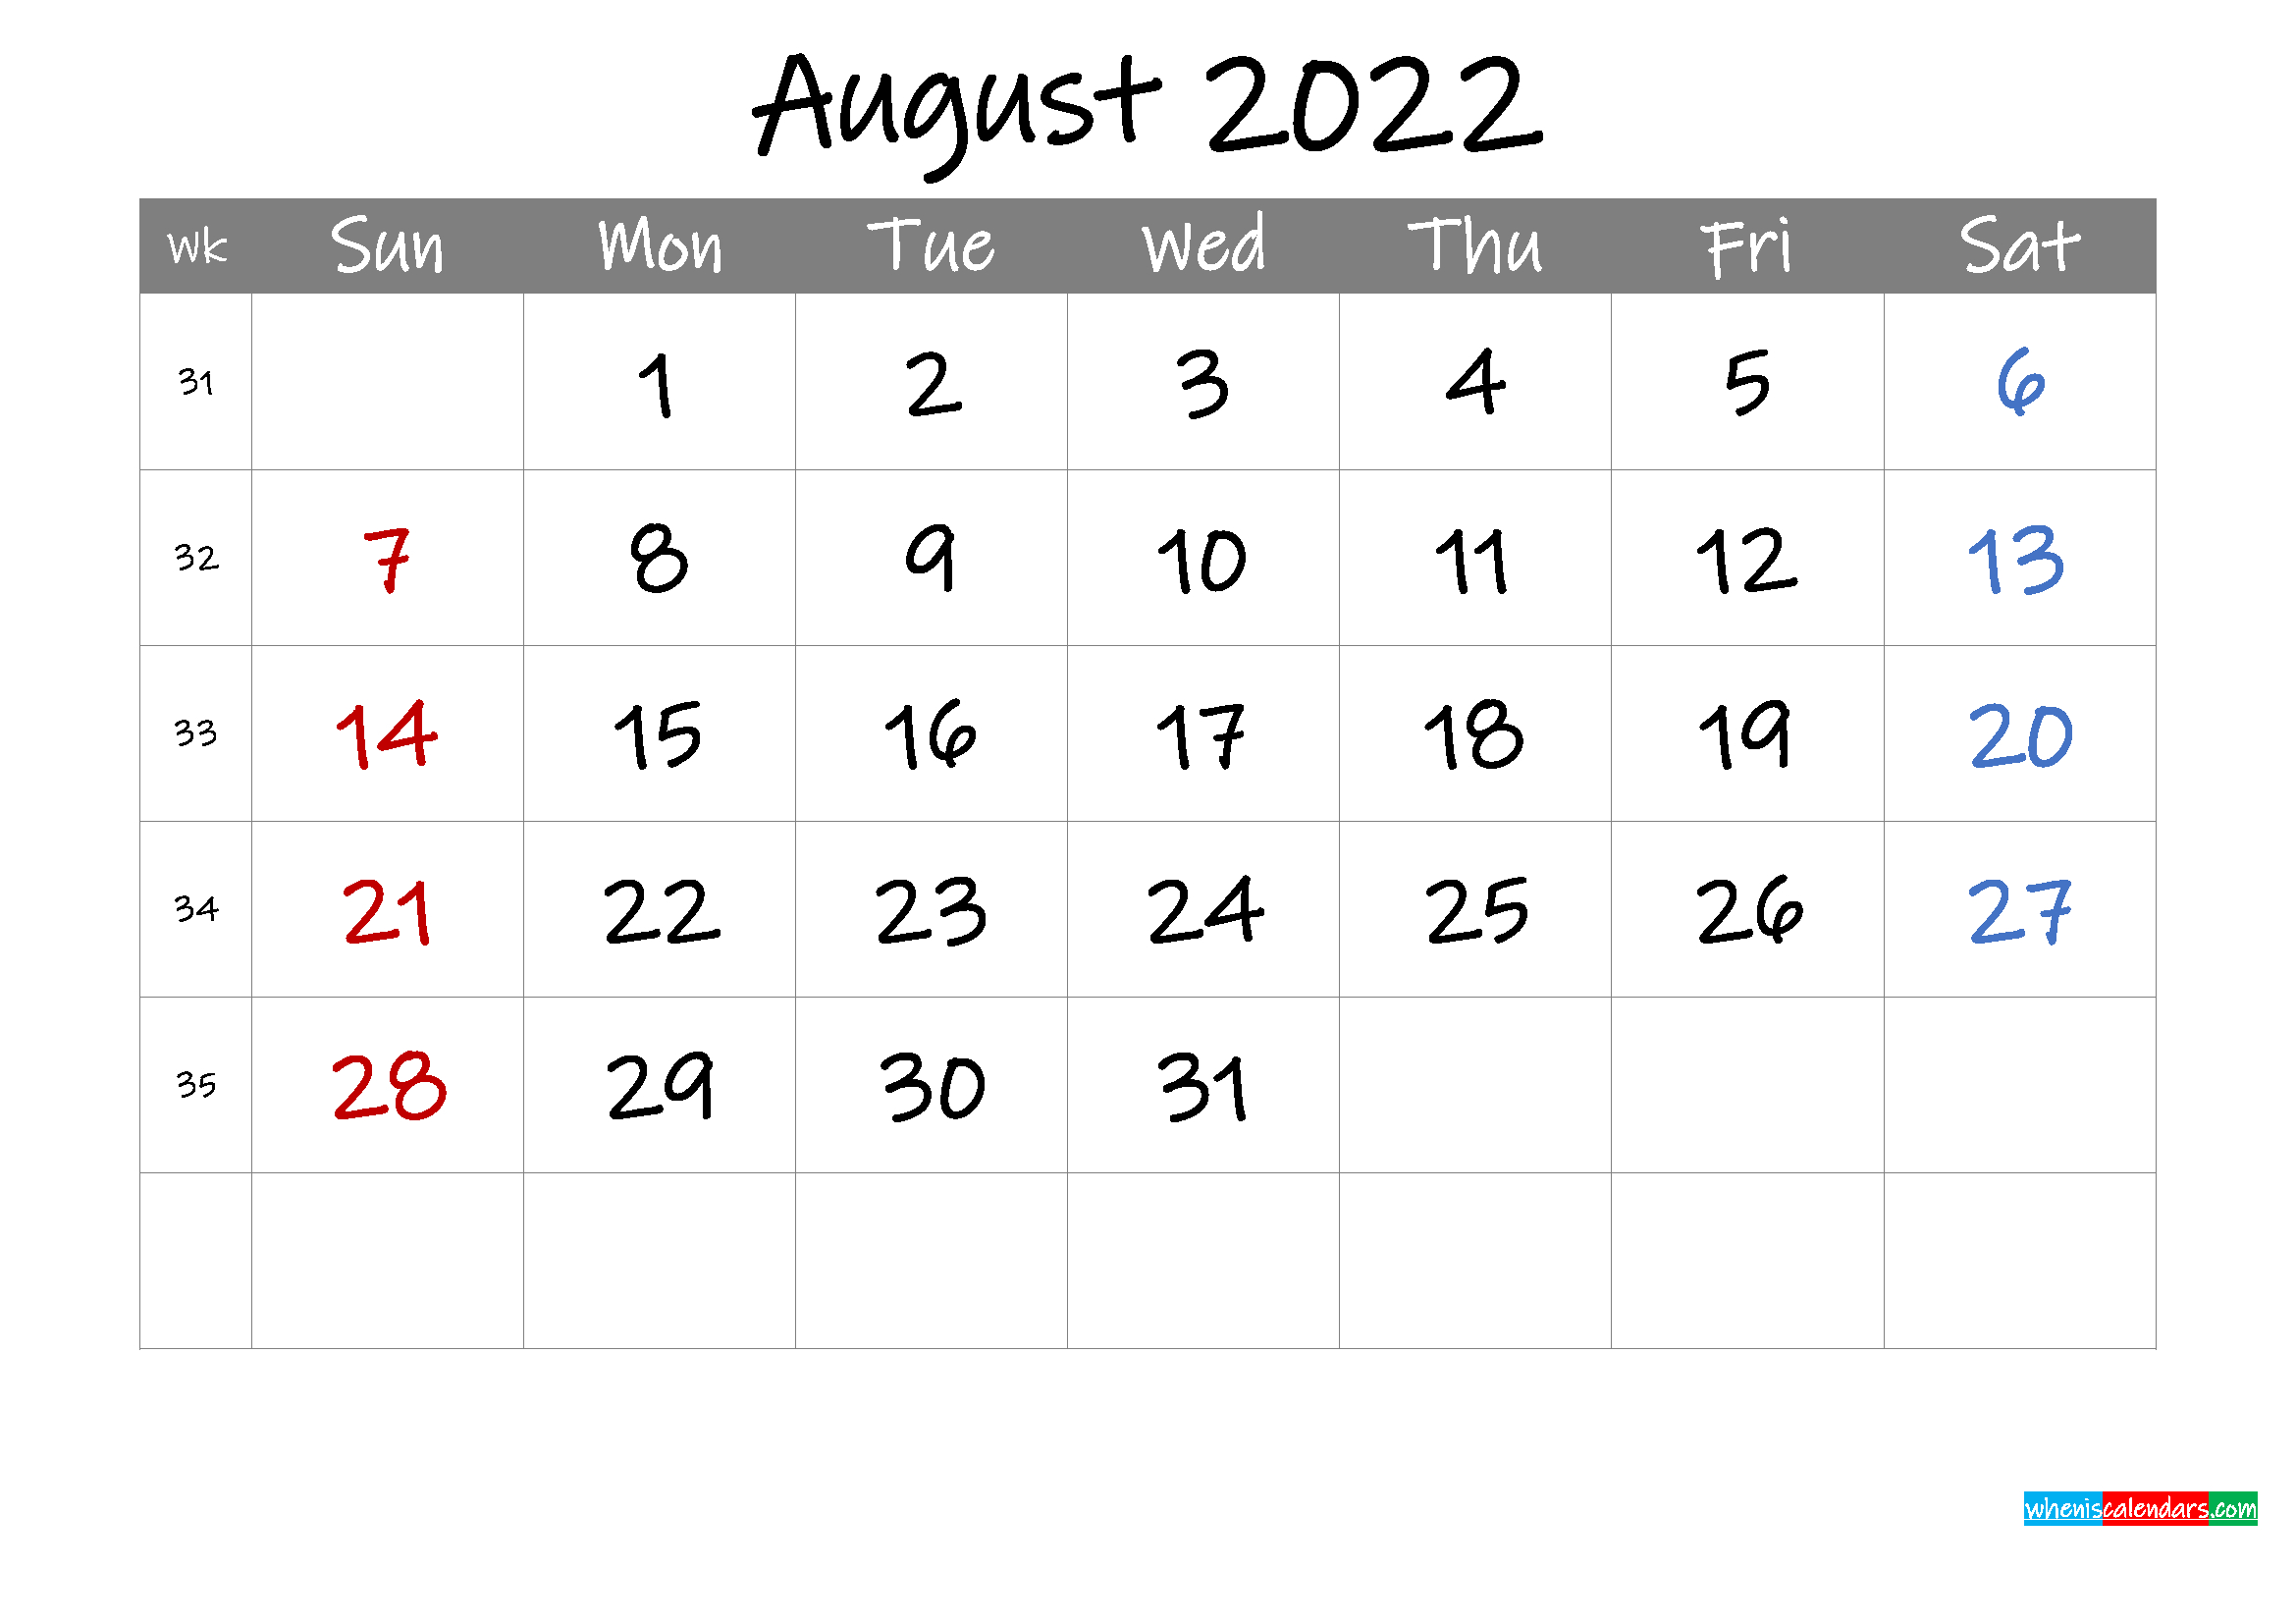 Editable August 2022 Calendar With Holidays - Template Ink22M8